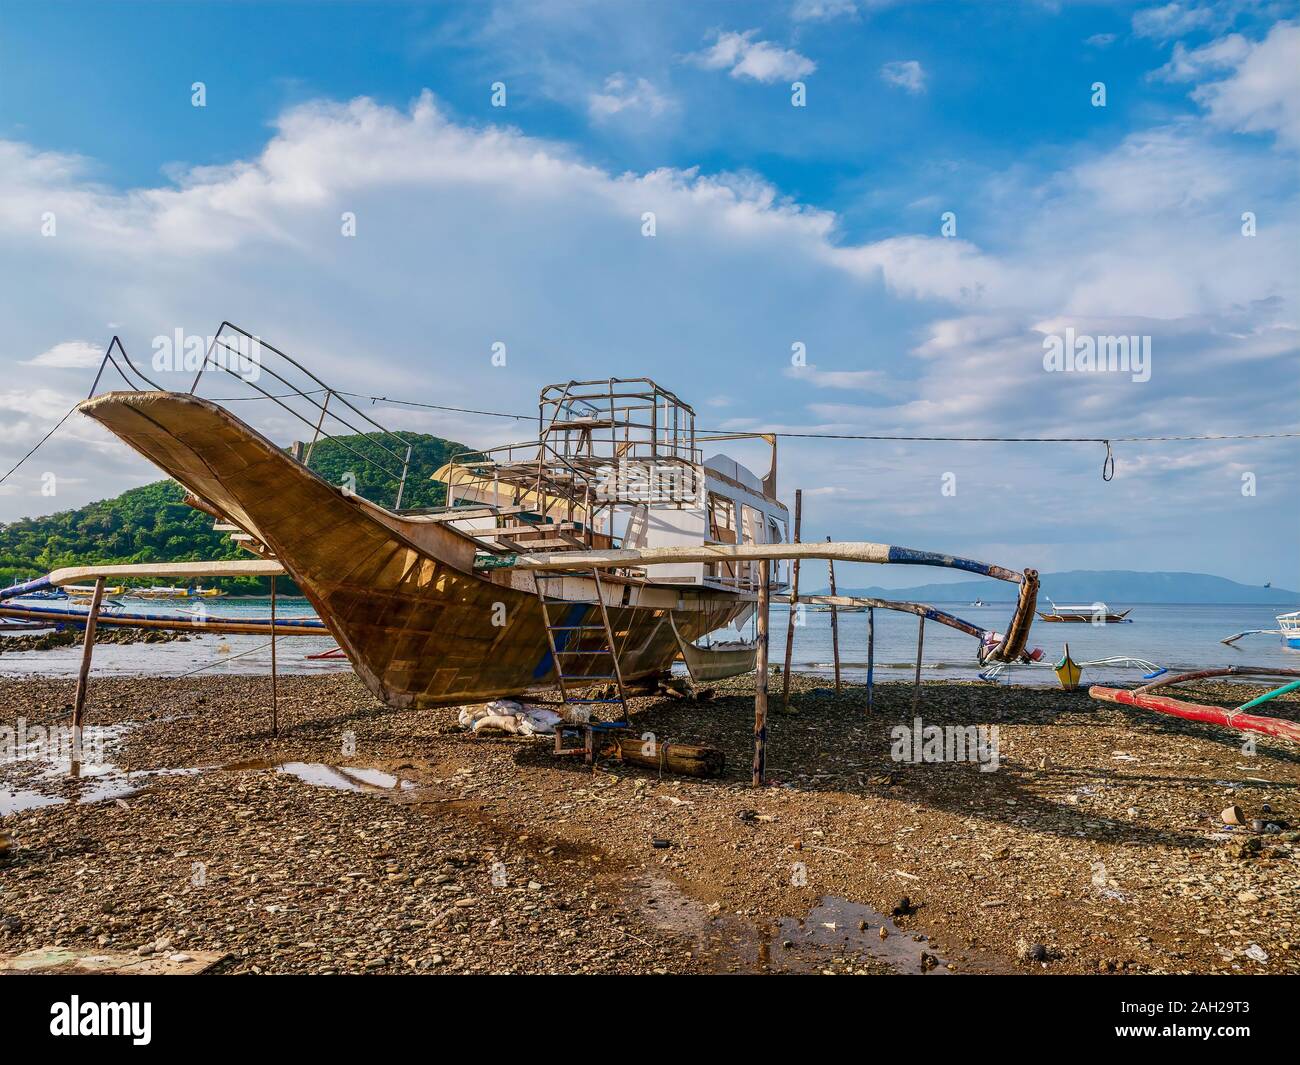 A Filipino wooden outrigger boat, locally known as a banca, under construction on an island beach at low tide. Bancas are used for interisland travel. Stock Photo